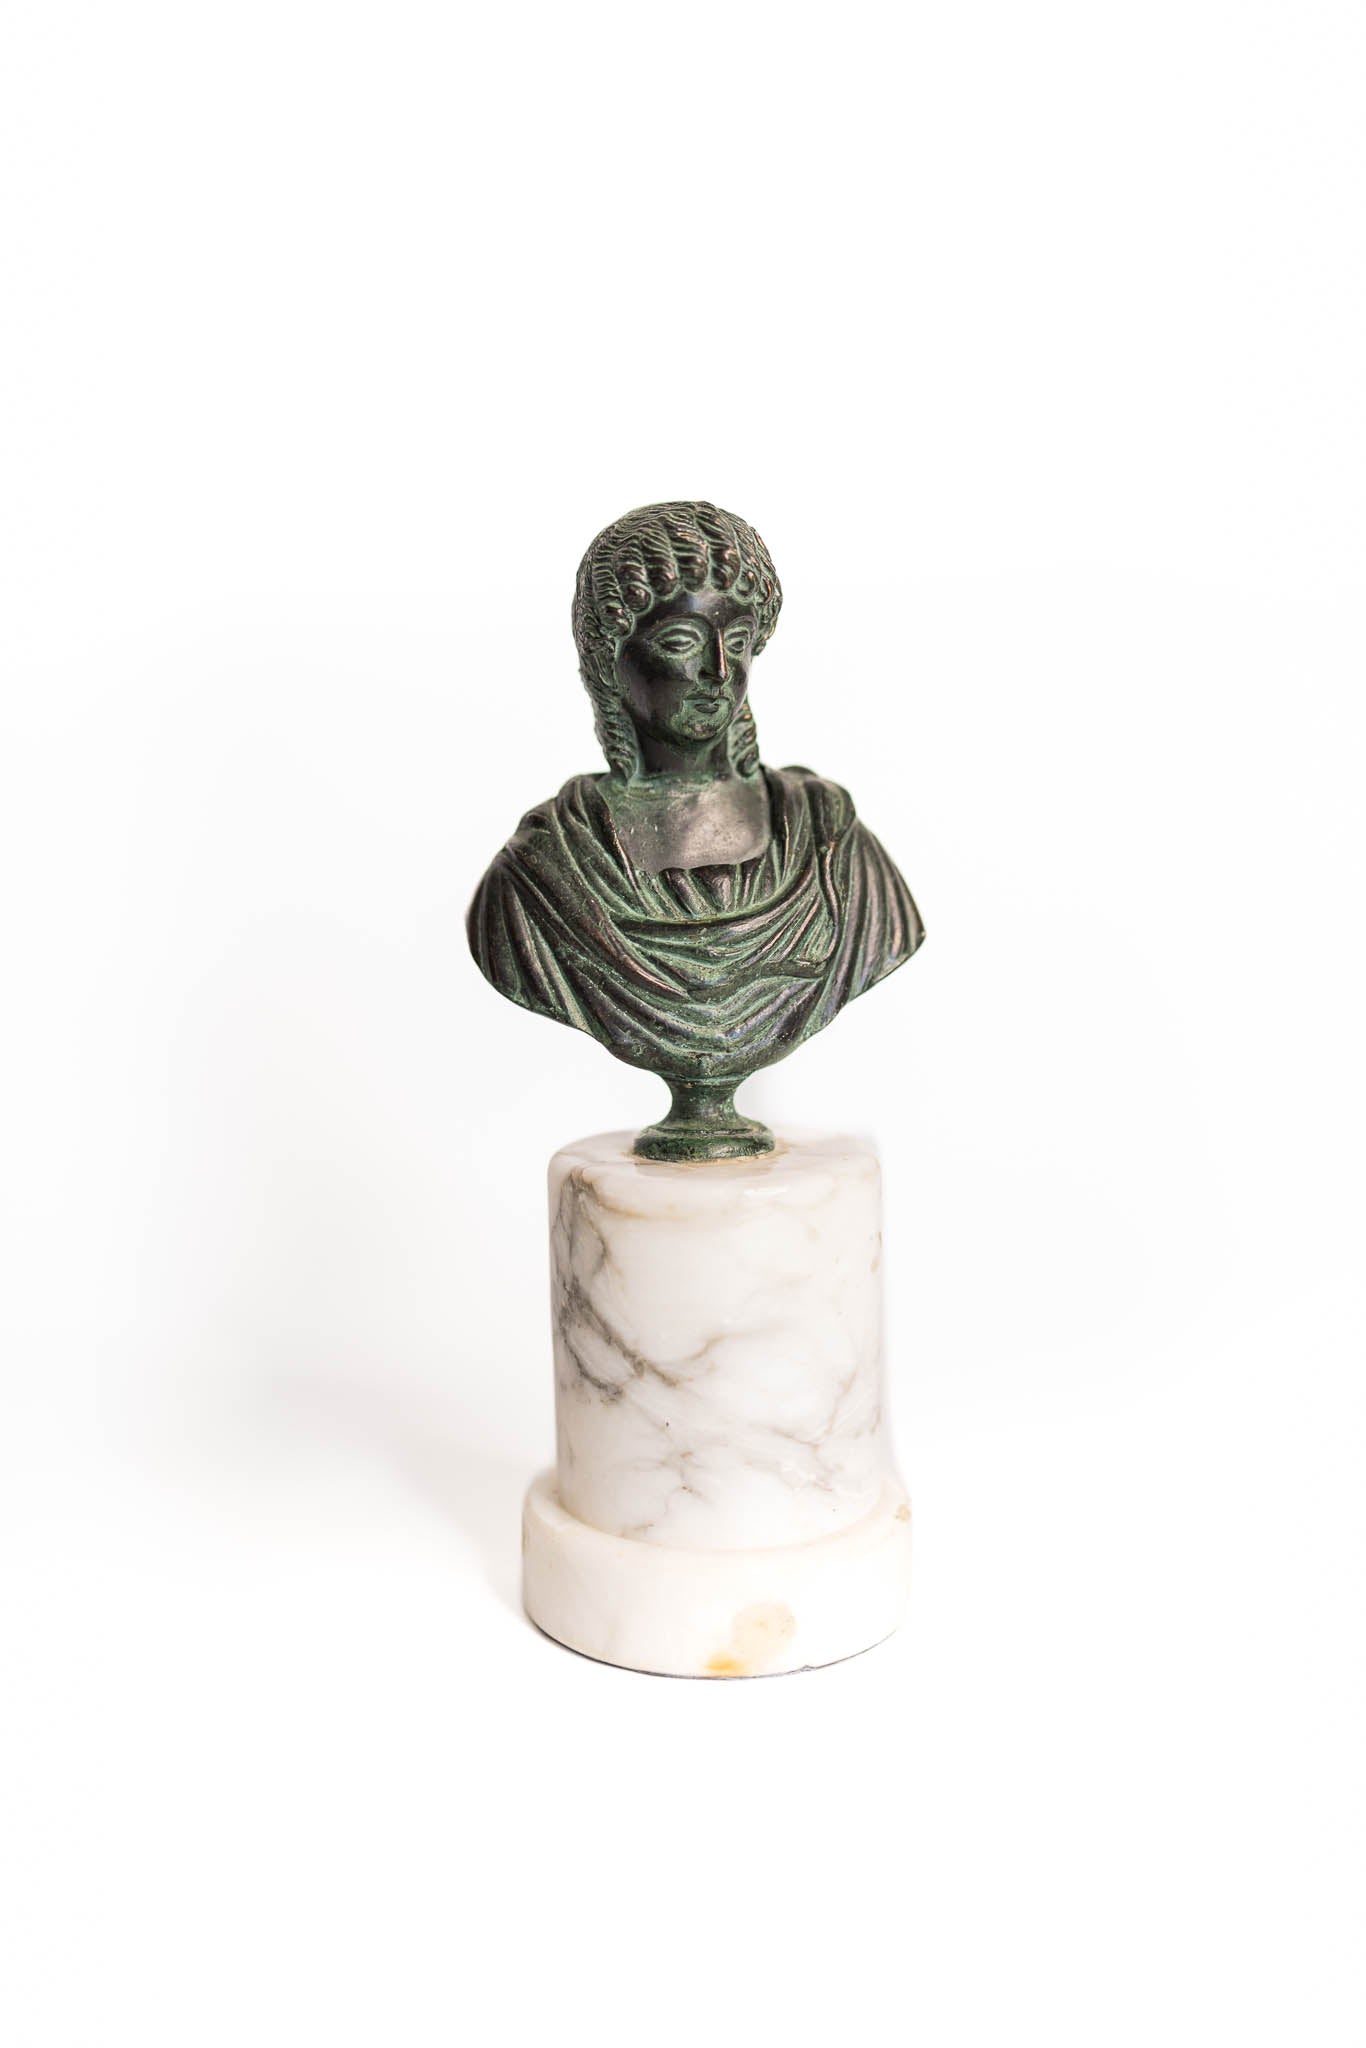 Greco - Roman Style Statue Composed of Marble and Bronze